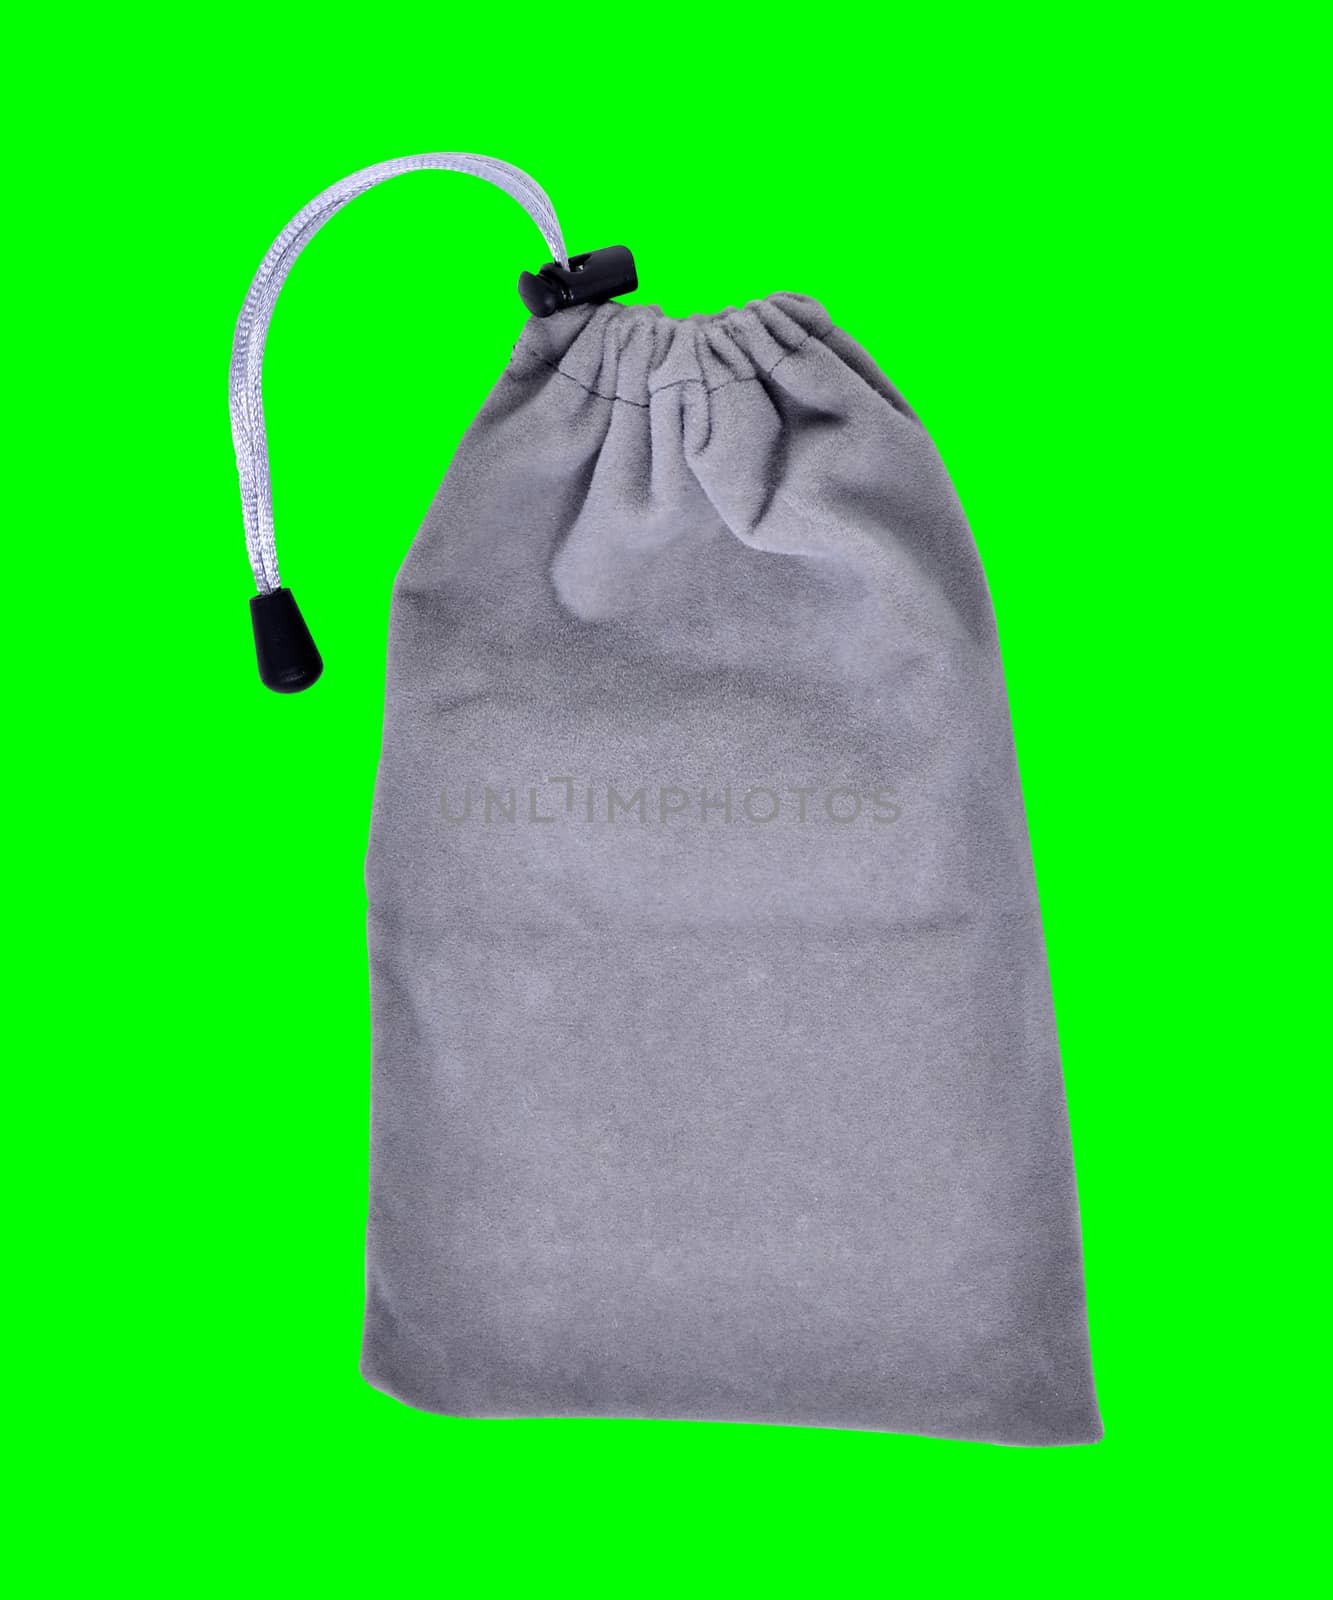 Grey Bags White Rope Fabric green screen Clipping Path by phochi